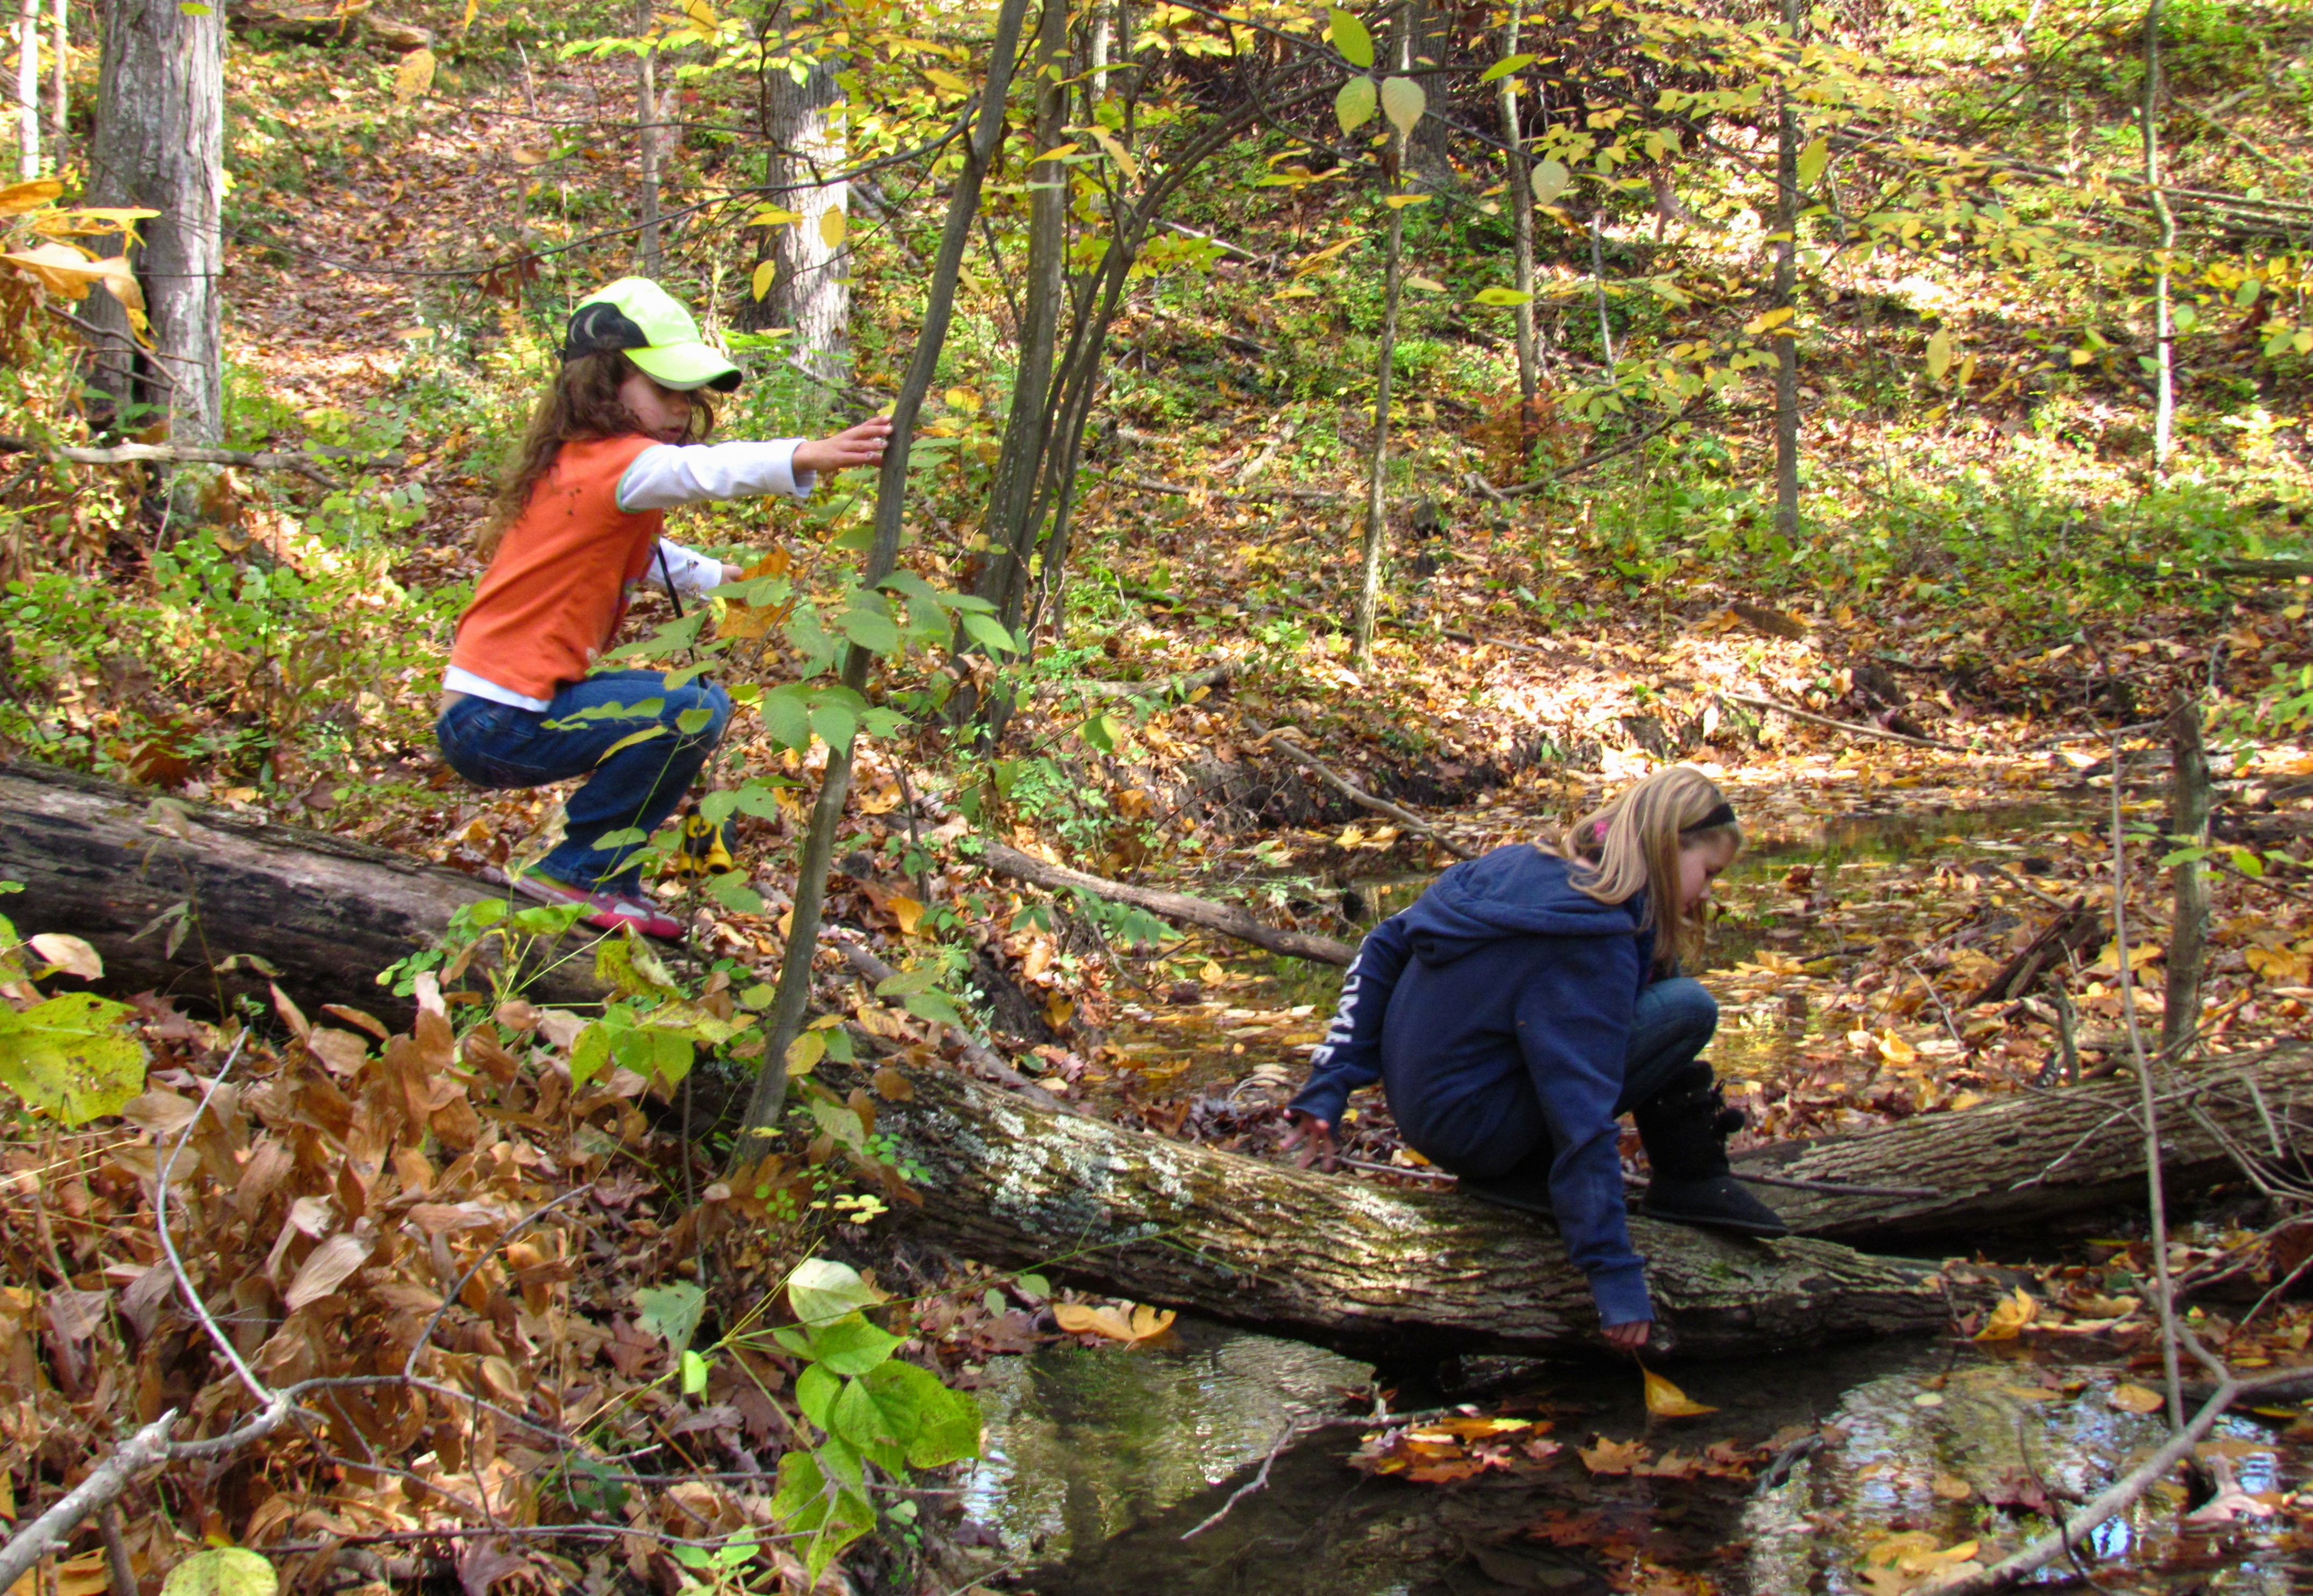 Two children explore the woods. One points across the way while the other sits on a log watching.